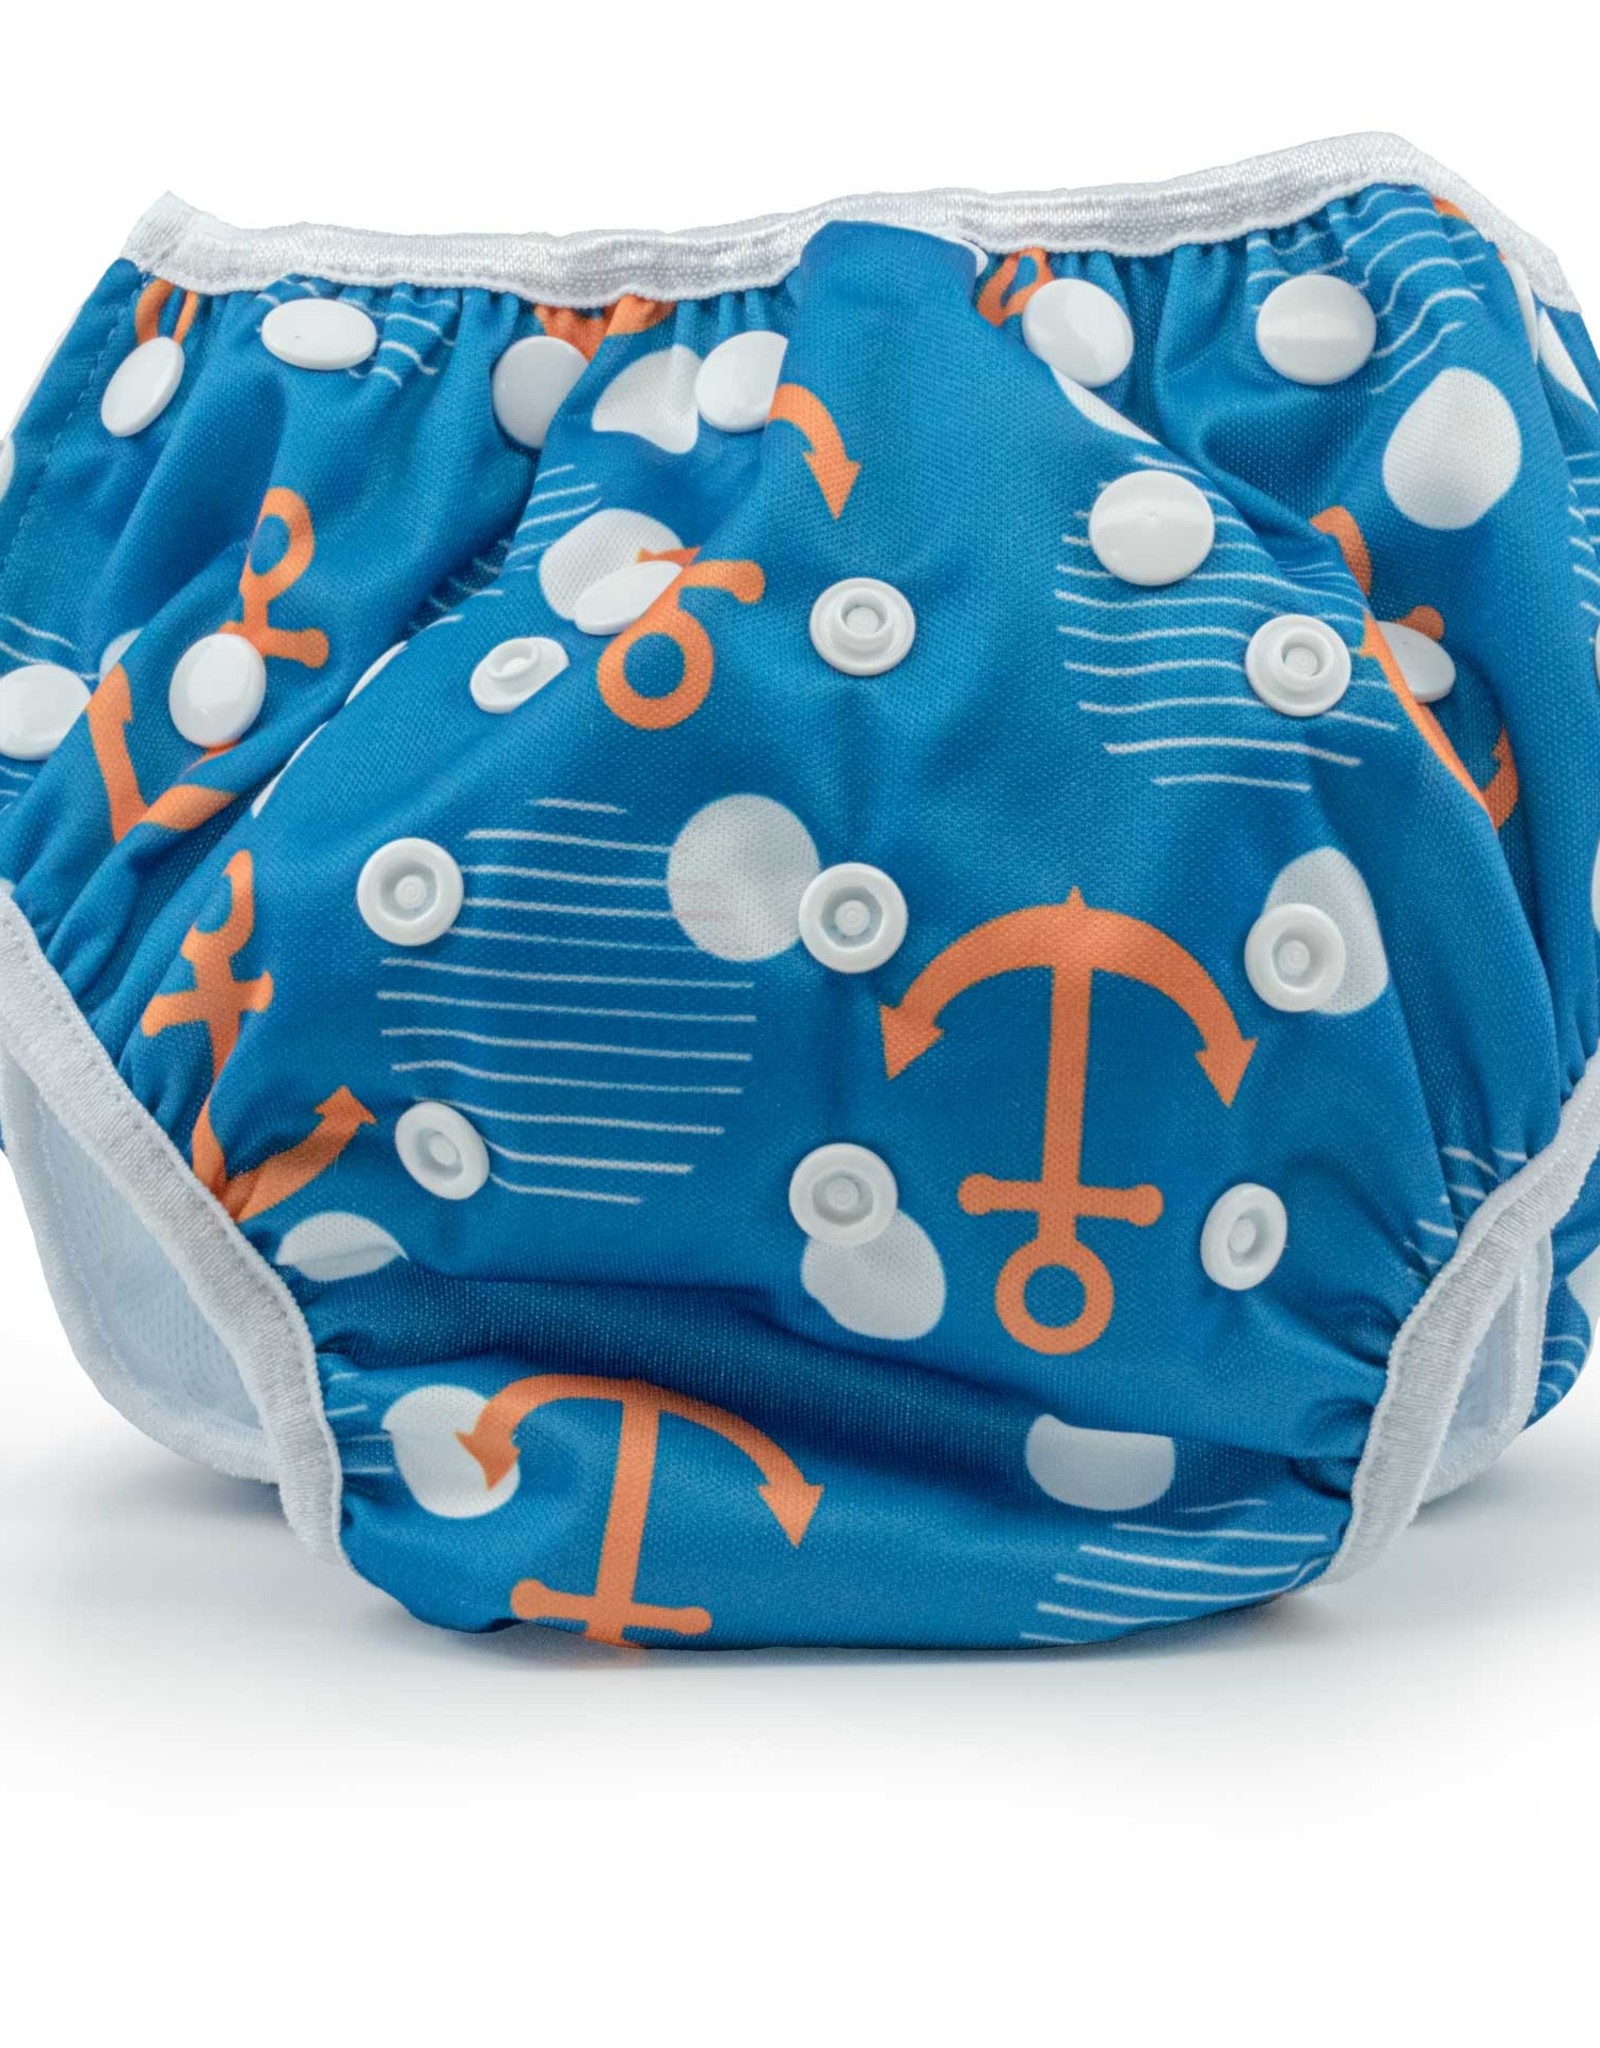 Babygoal Baby Swim Diapers, Reusable Washable and Adjustable for Swimming,  Outdoor Activities and Daily Use, Fit Babies 0-2 Years (2FSW1226-CA)